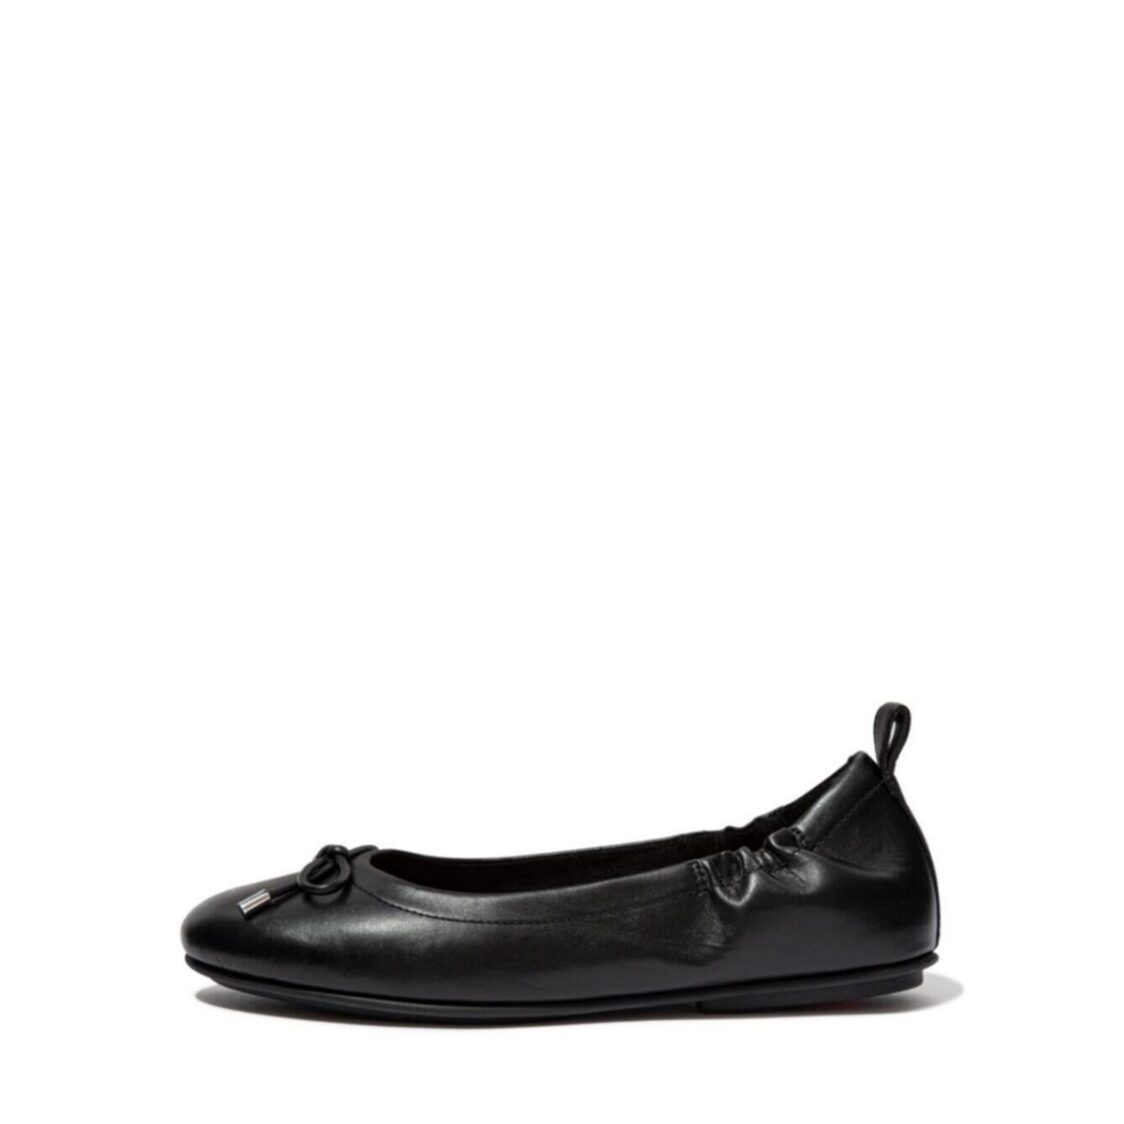 FITFLOP Allegro Bow Leather Ballerinas All Black